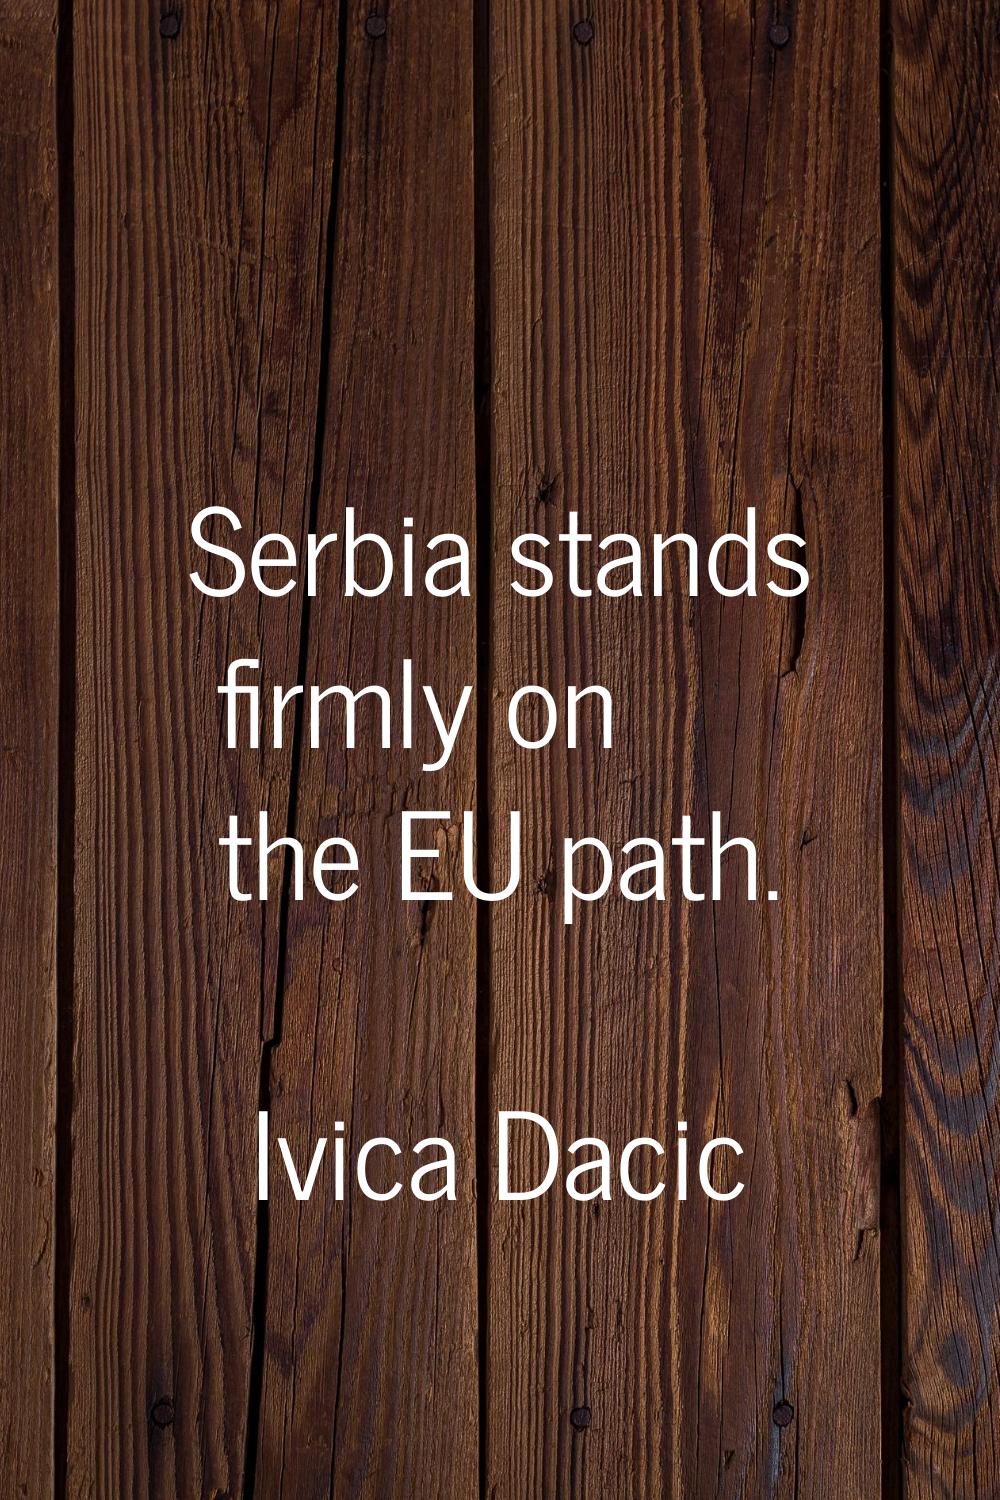 Serbia stands firmly on the EU path.